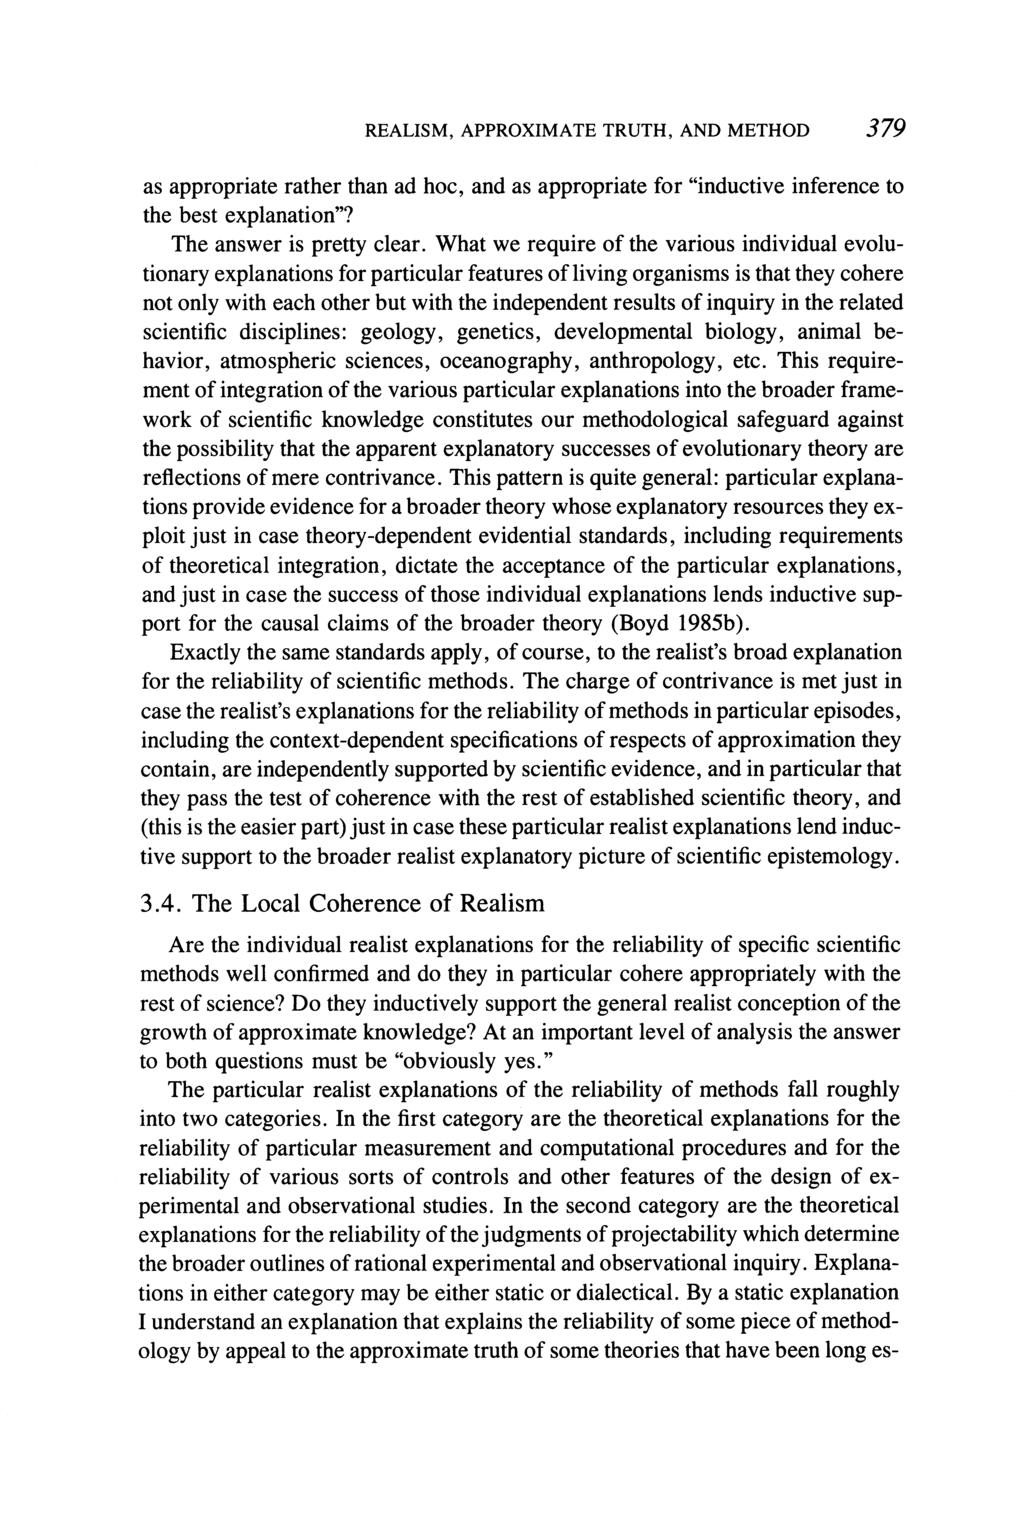 REALISM, APPROXIMATE TRUTH, AND METHOD 379 as appropriate rather than ad hoc, and as appropriate for "inductive inference to the best explanation"? The answer is pretty clear.